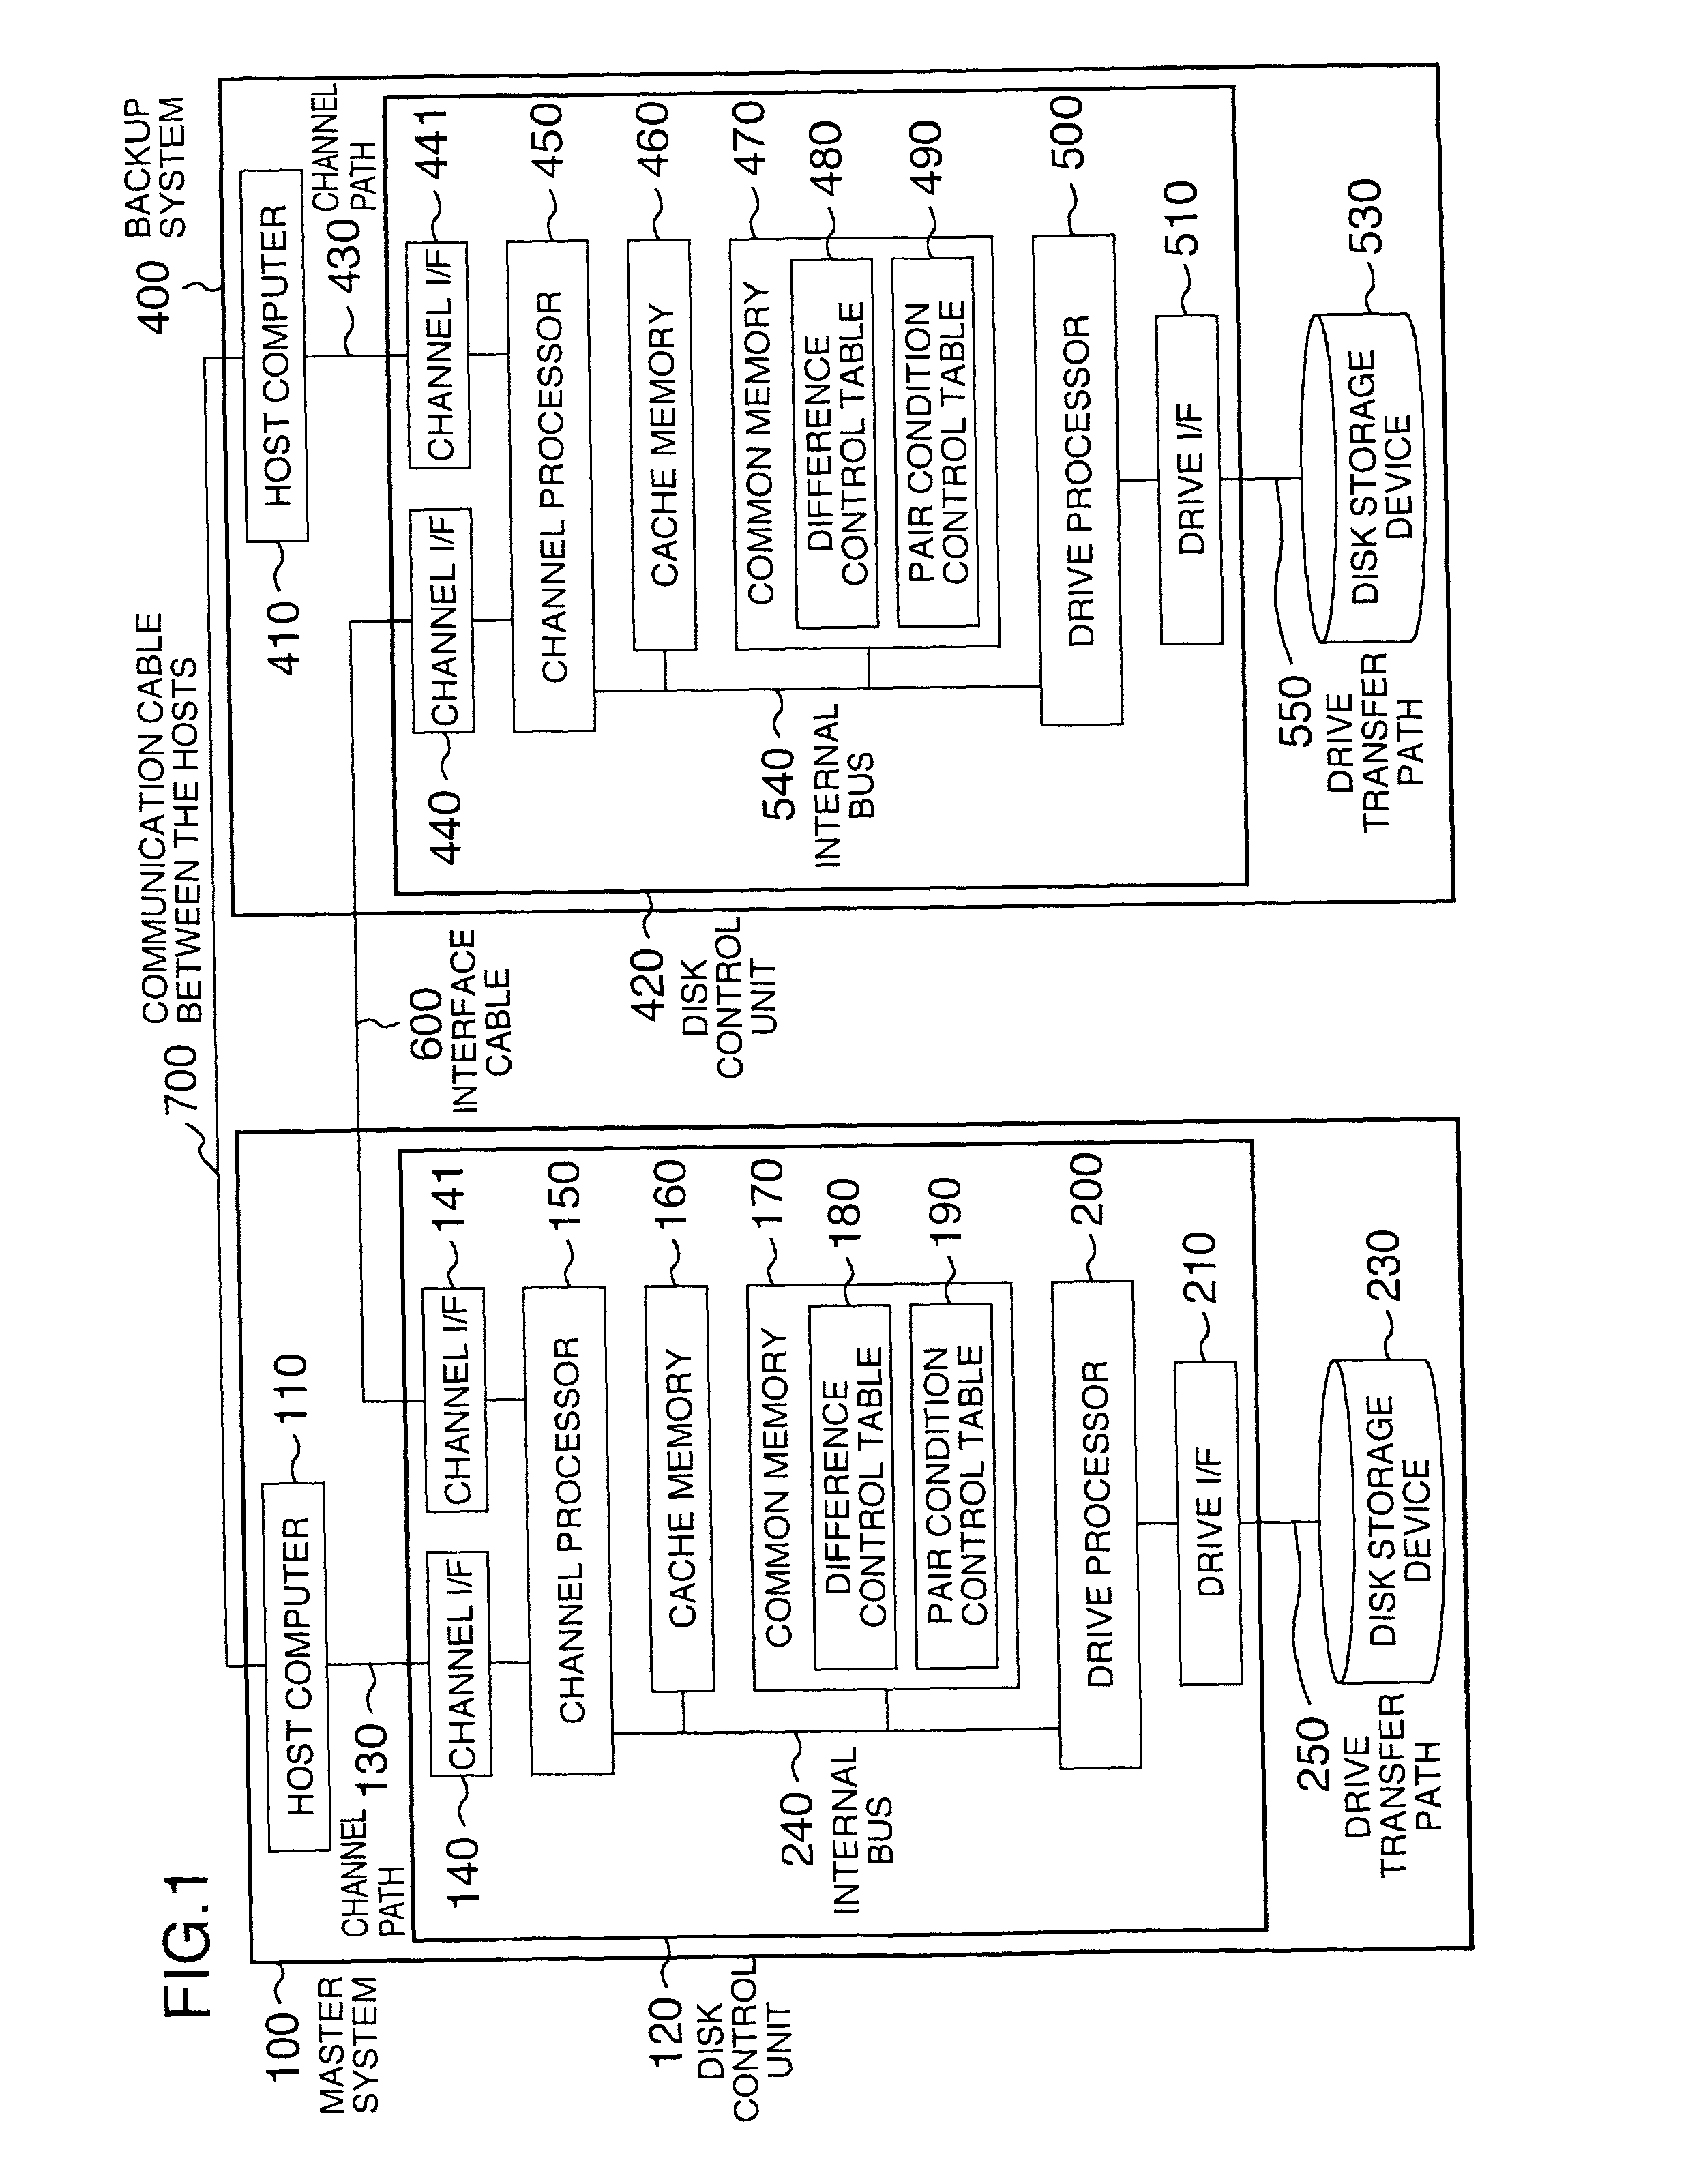 Method and system for storing duplicate data